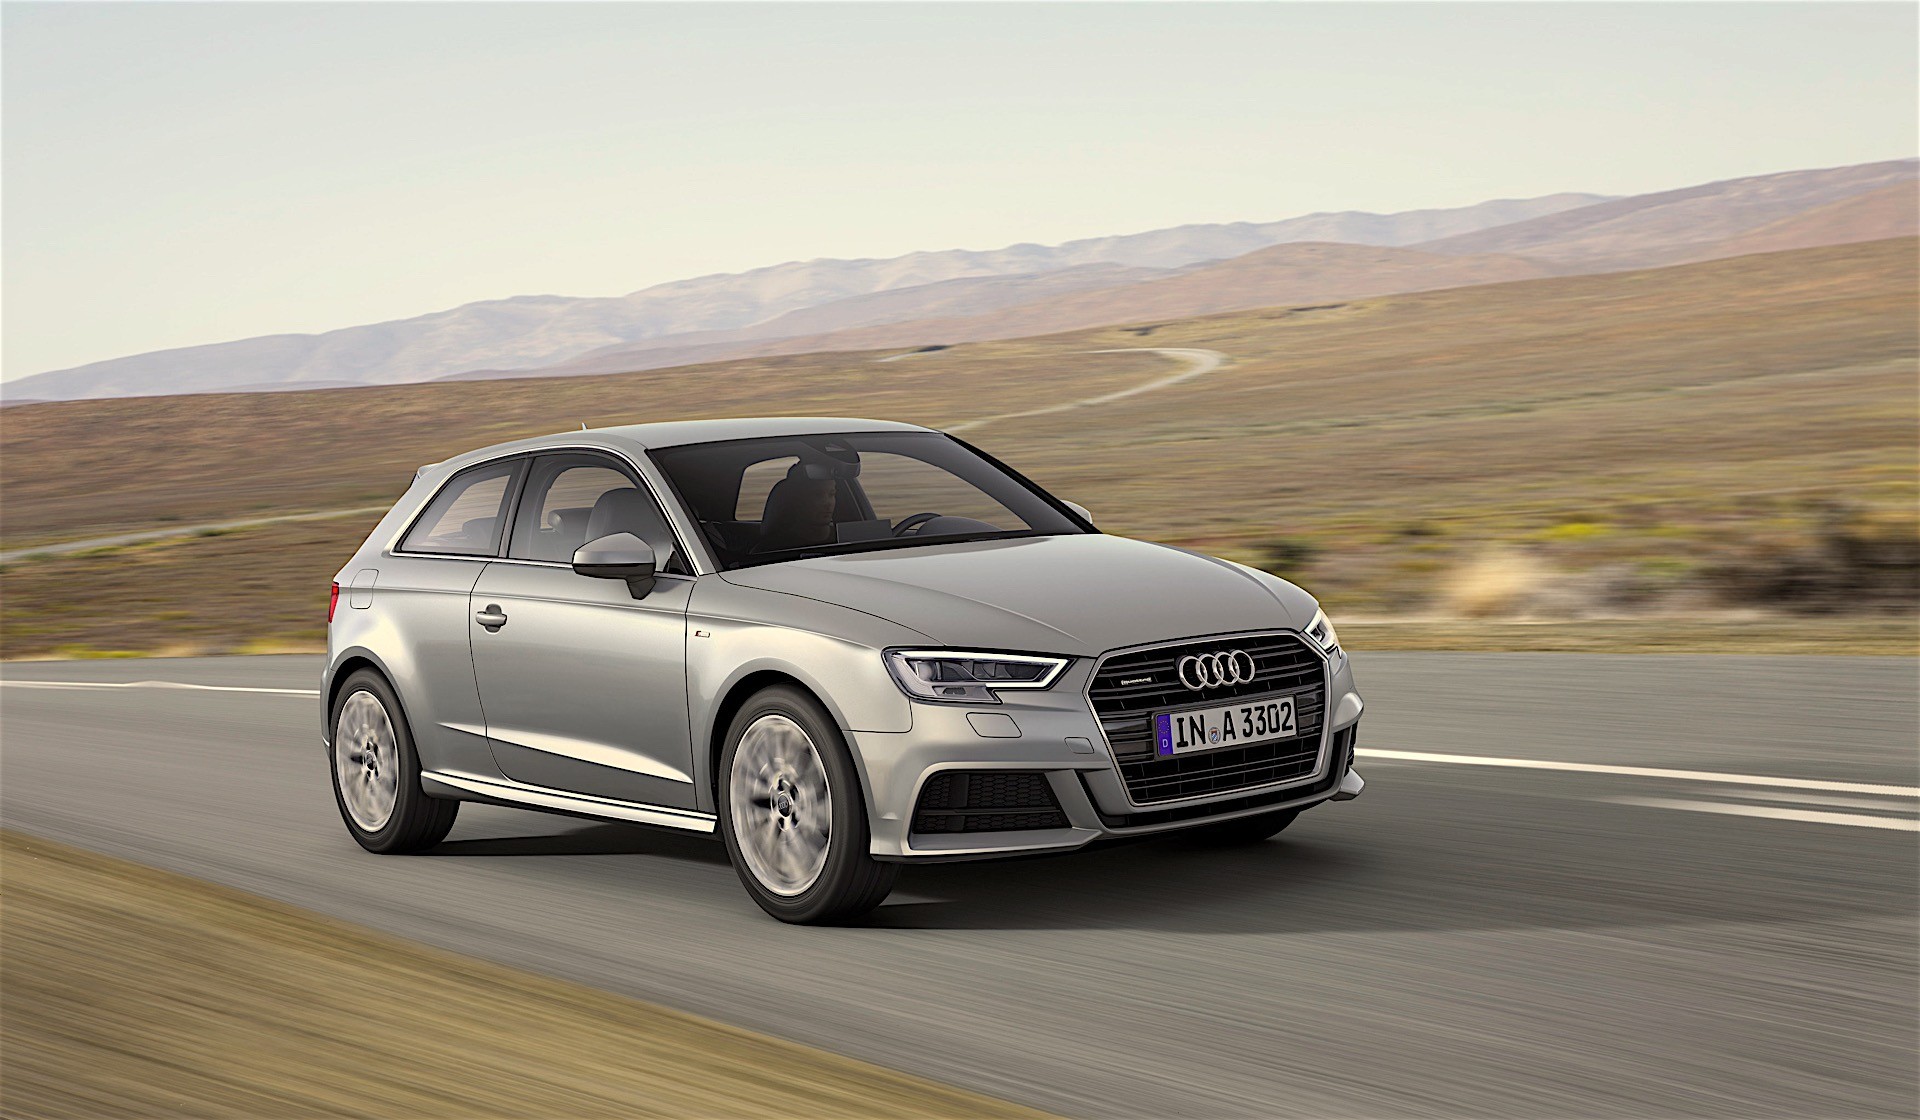 2017 Audi A3 Facelift Configurator Launched in Germany, S3 ...